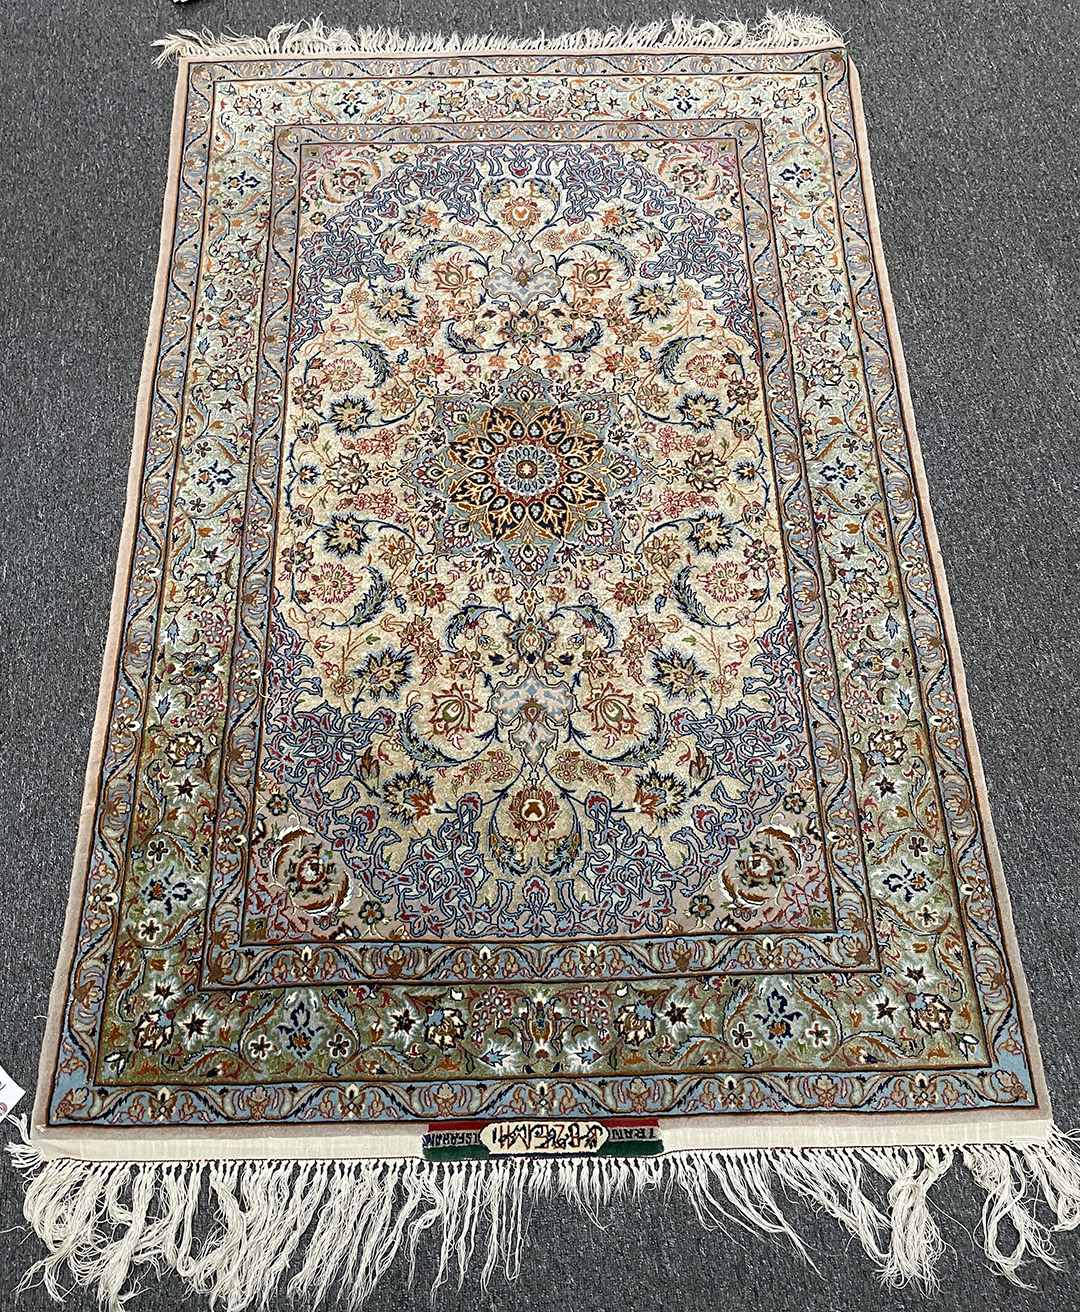 Persian rug has fringe that is wearing away and the owner wants to save it from further damage.